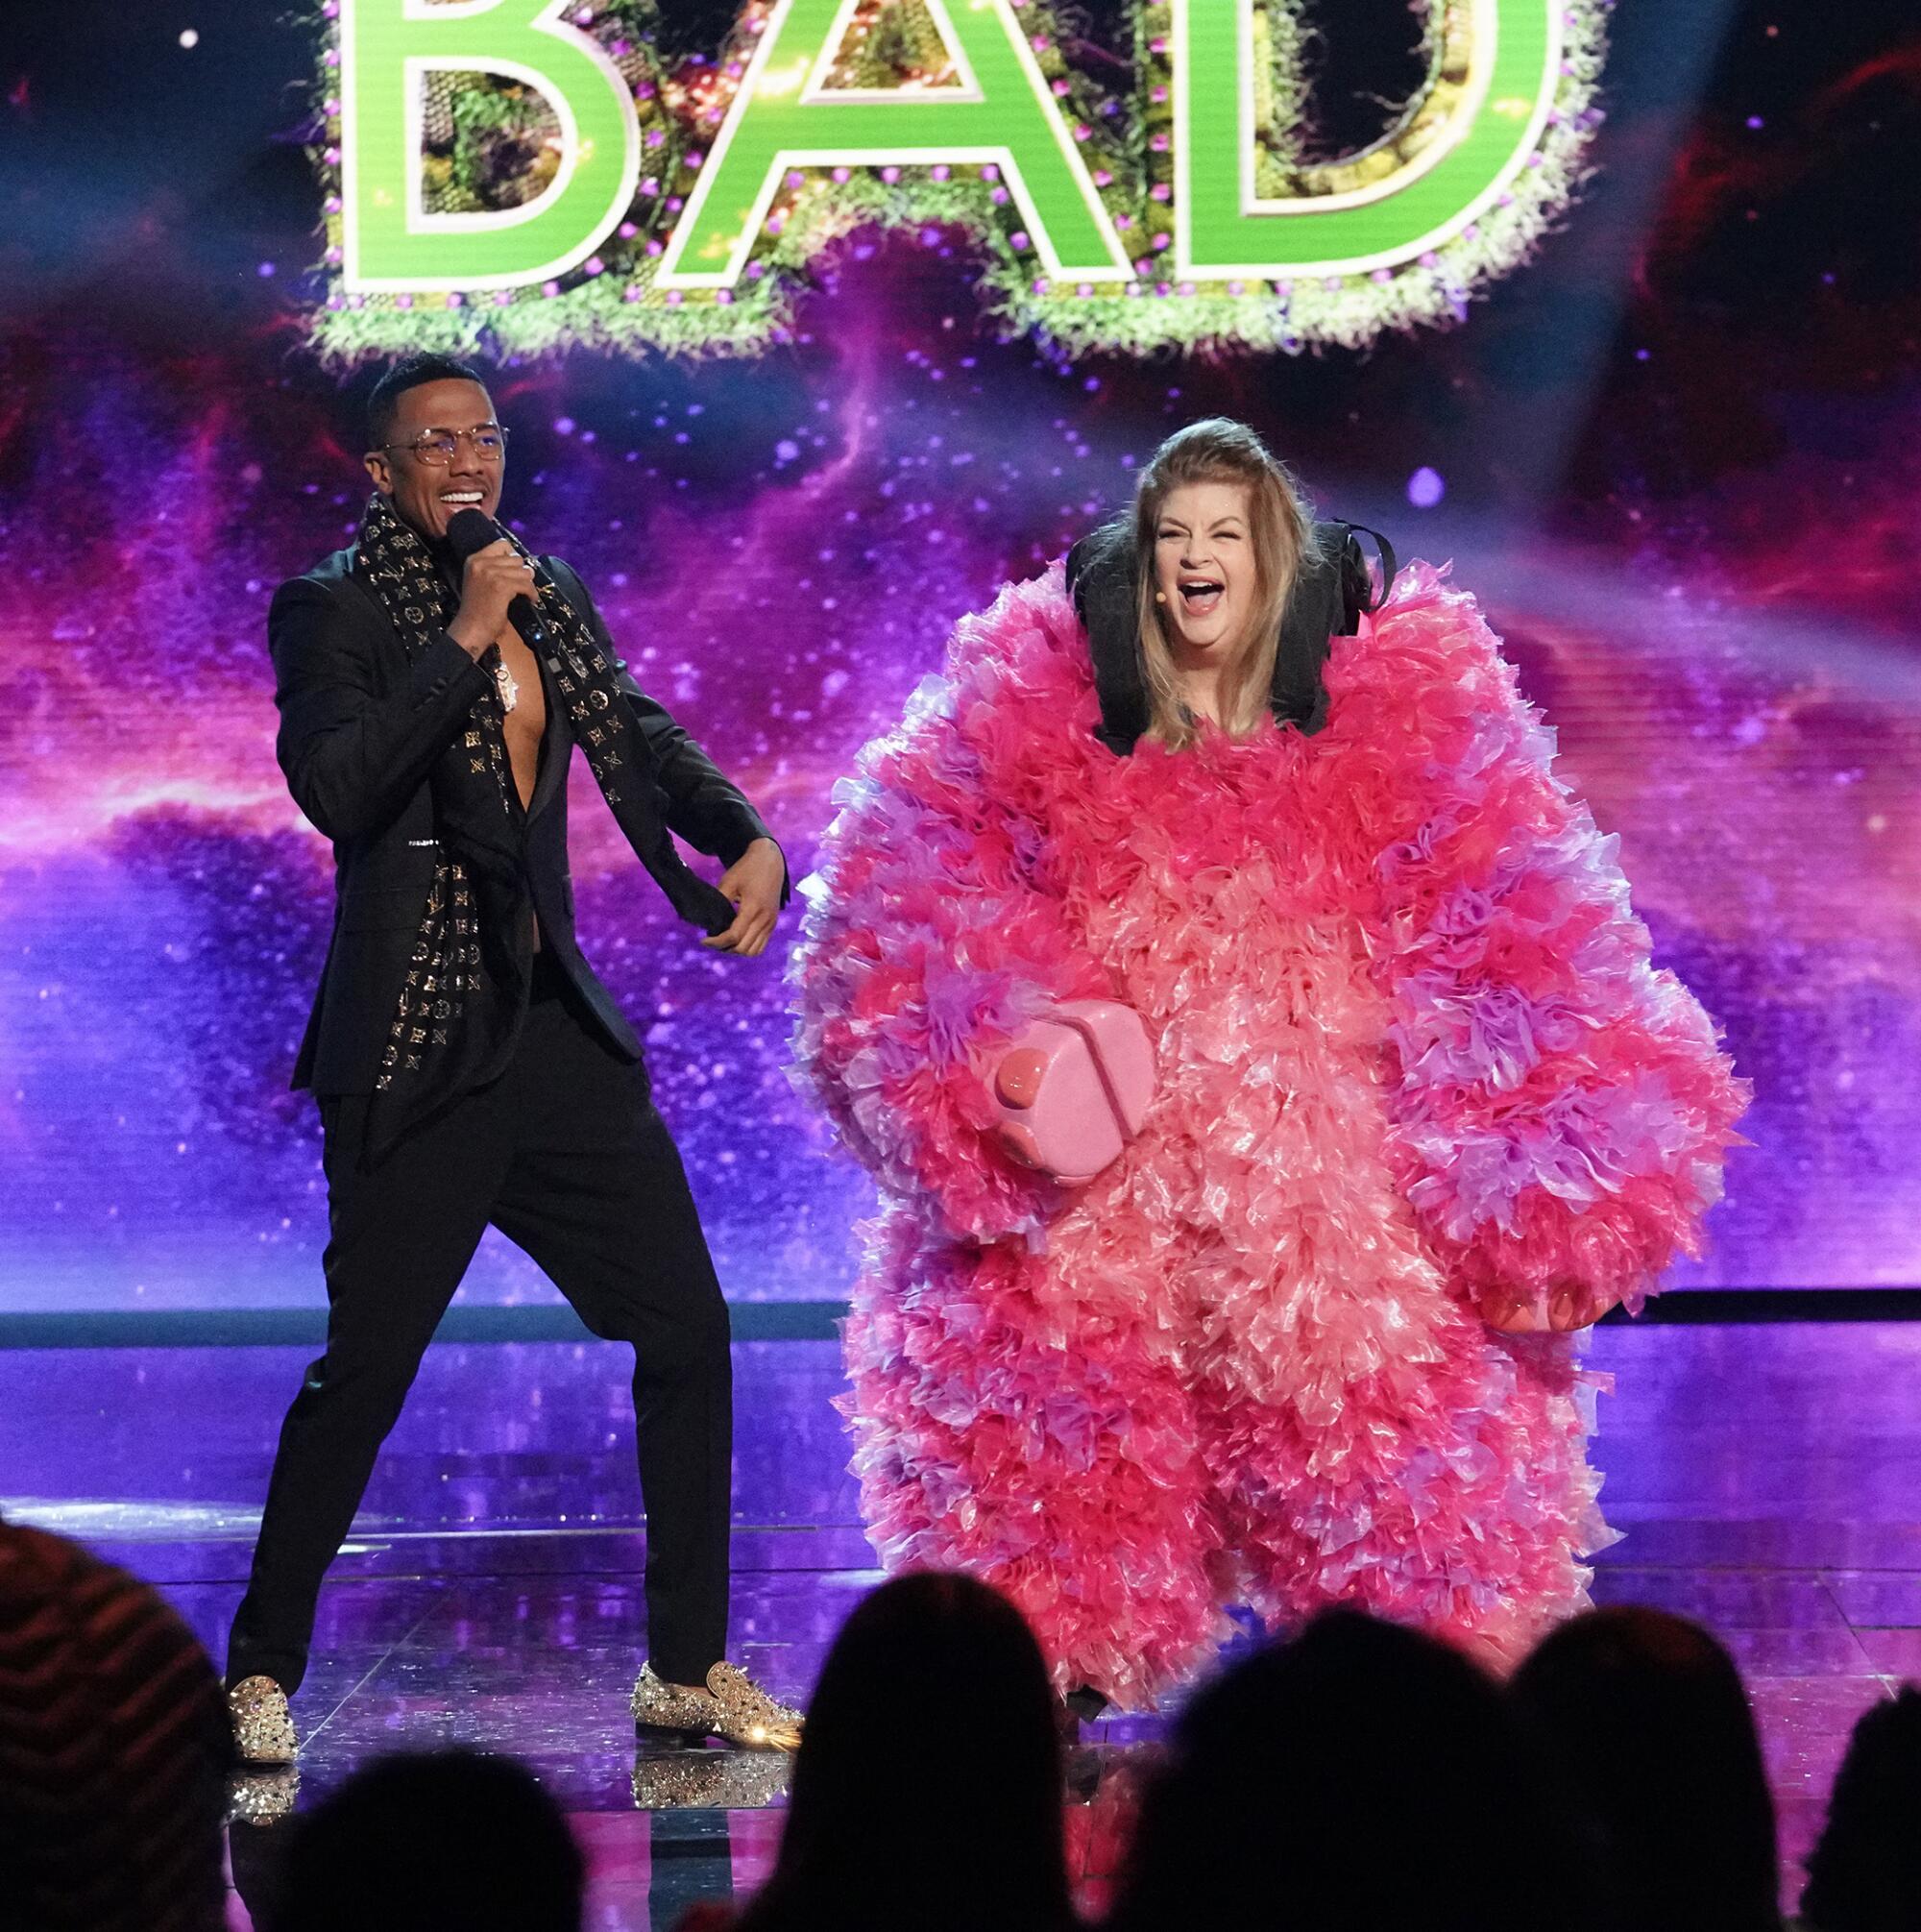 A man holding a microphone stands next to a woman wearing a fluffy pink costume on stage